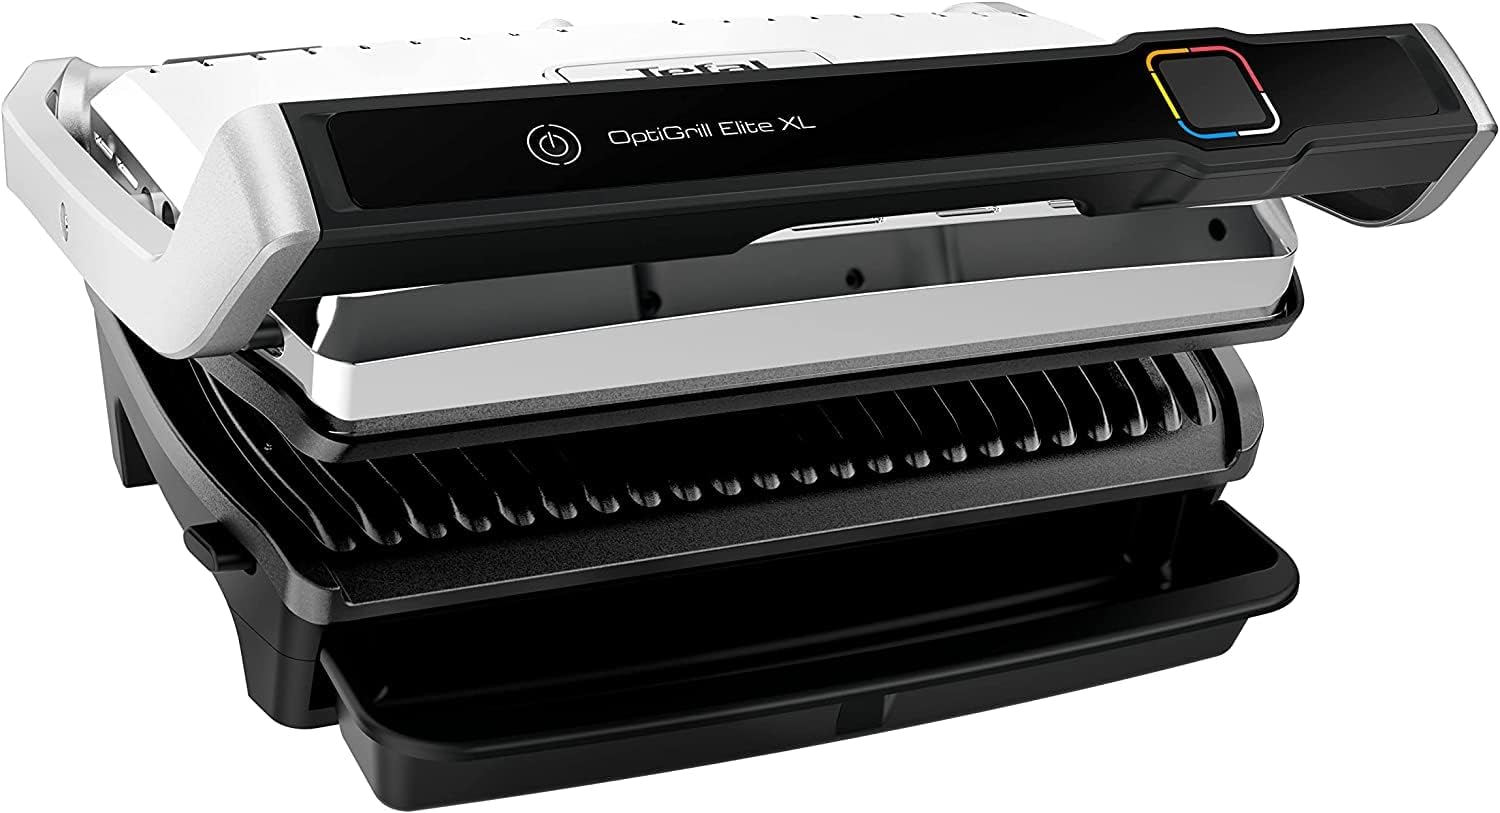 Tefal GC760D OptiGrill Elite XL Contact Grill Includes Recipe Book 16 Intelligent Programmes Digital Display Grill Boost Function Dishwasher Safe Plates 800 cm² Stainless Steel / Black